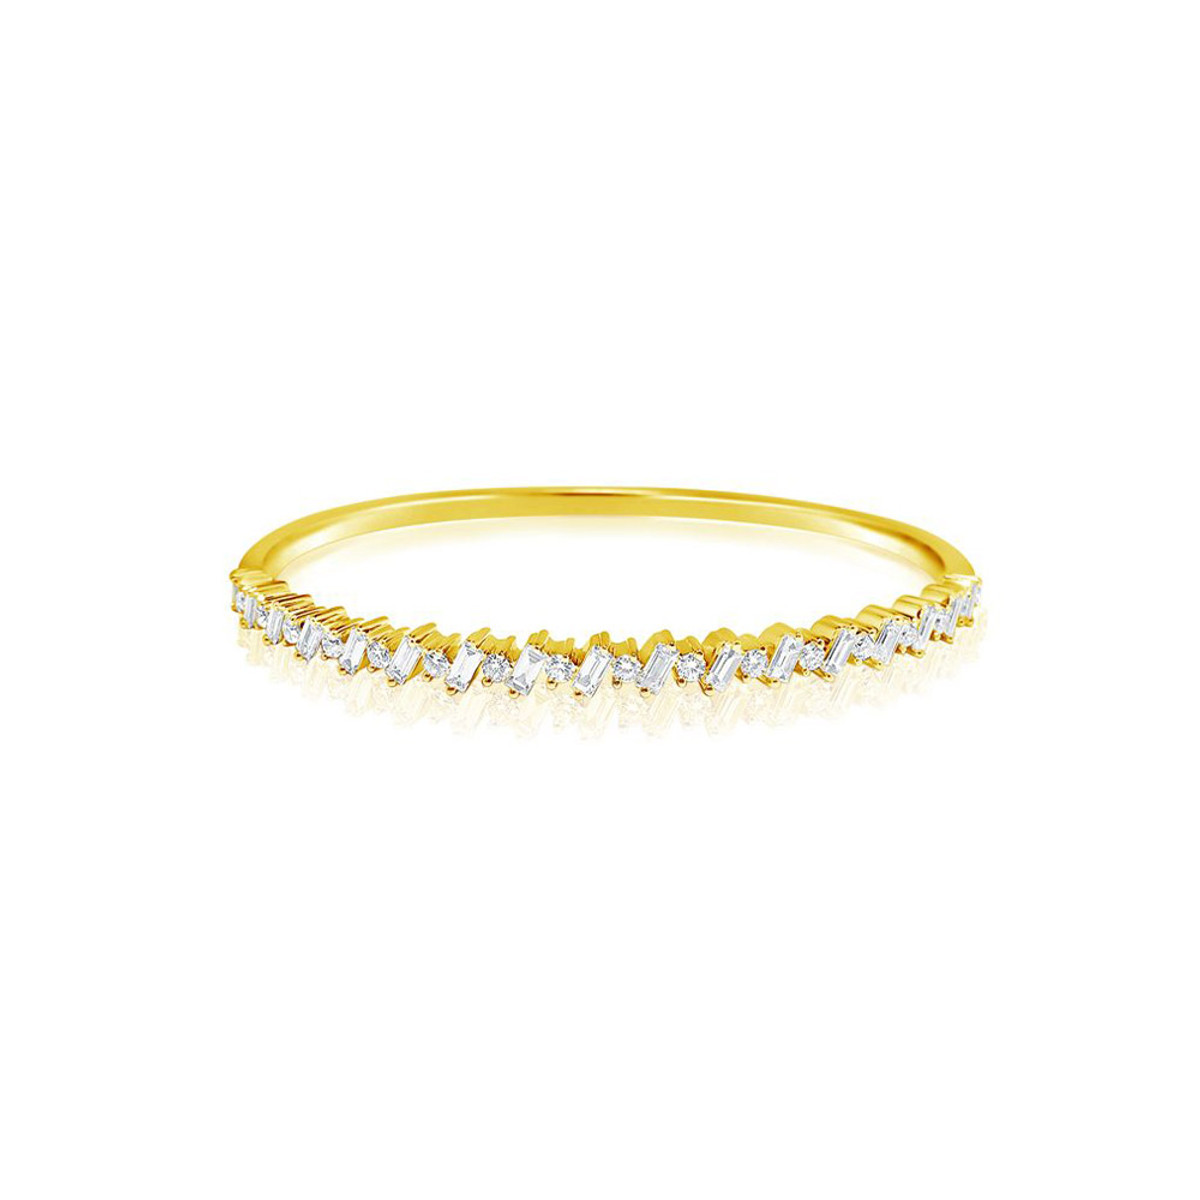 Hyde Park Collection 14K Yellow Gold Diamond Bangle-38322 Product Image